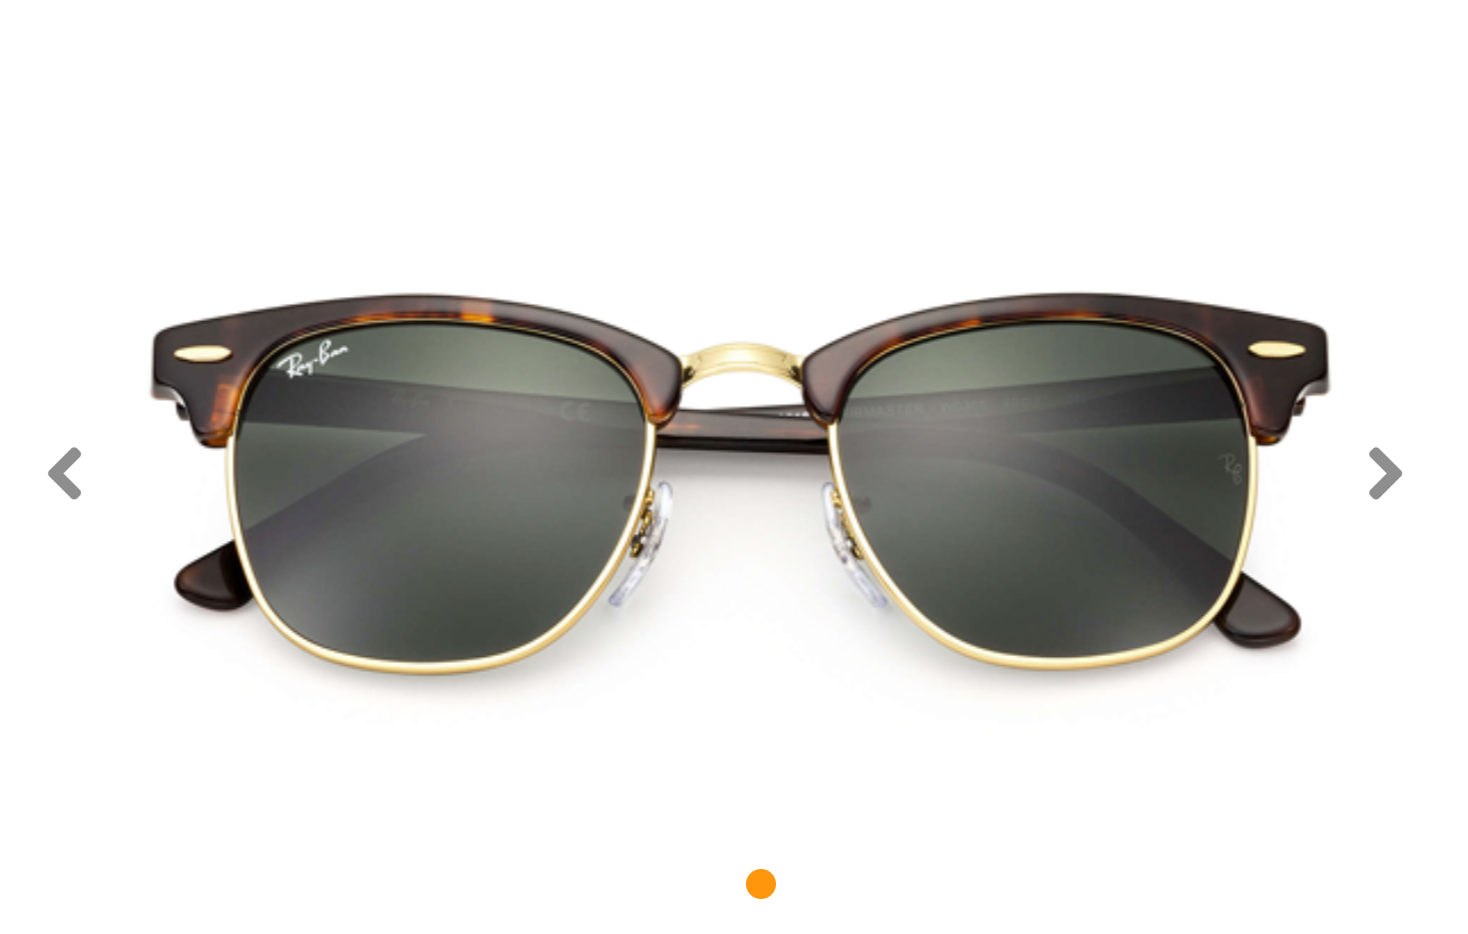 ray-ban-sunglasses-89-classic-pilots-concave-styling-2020-6-18